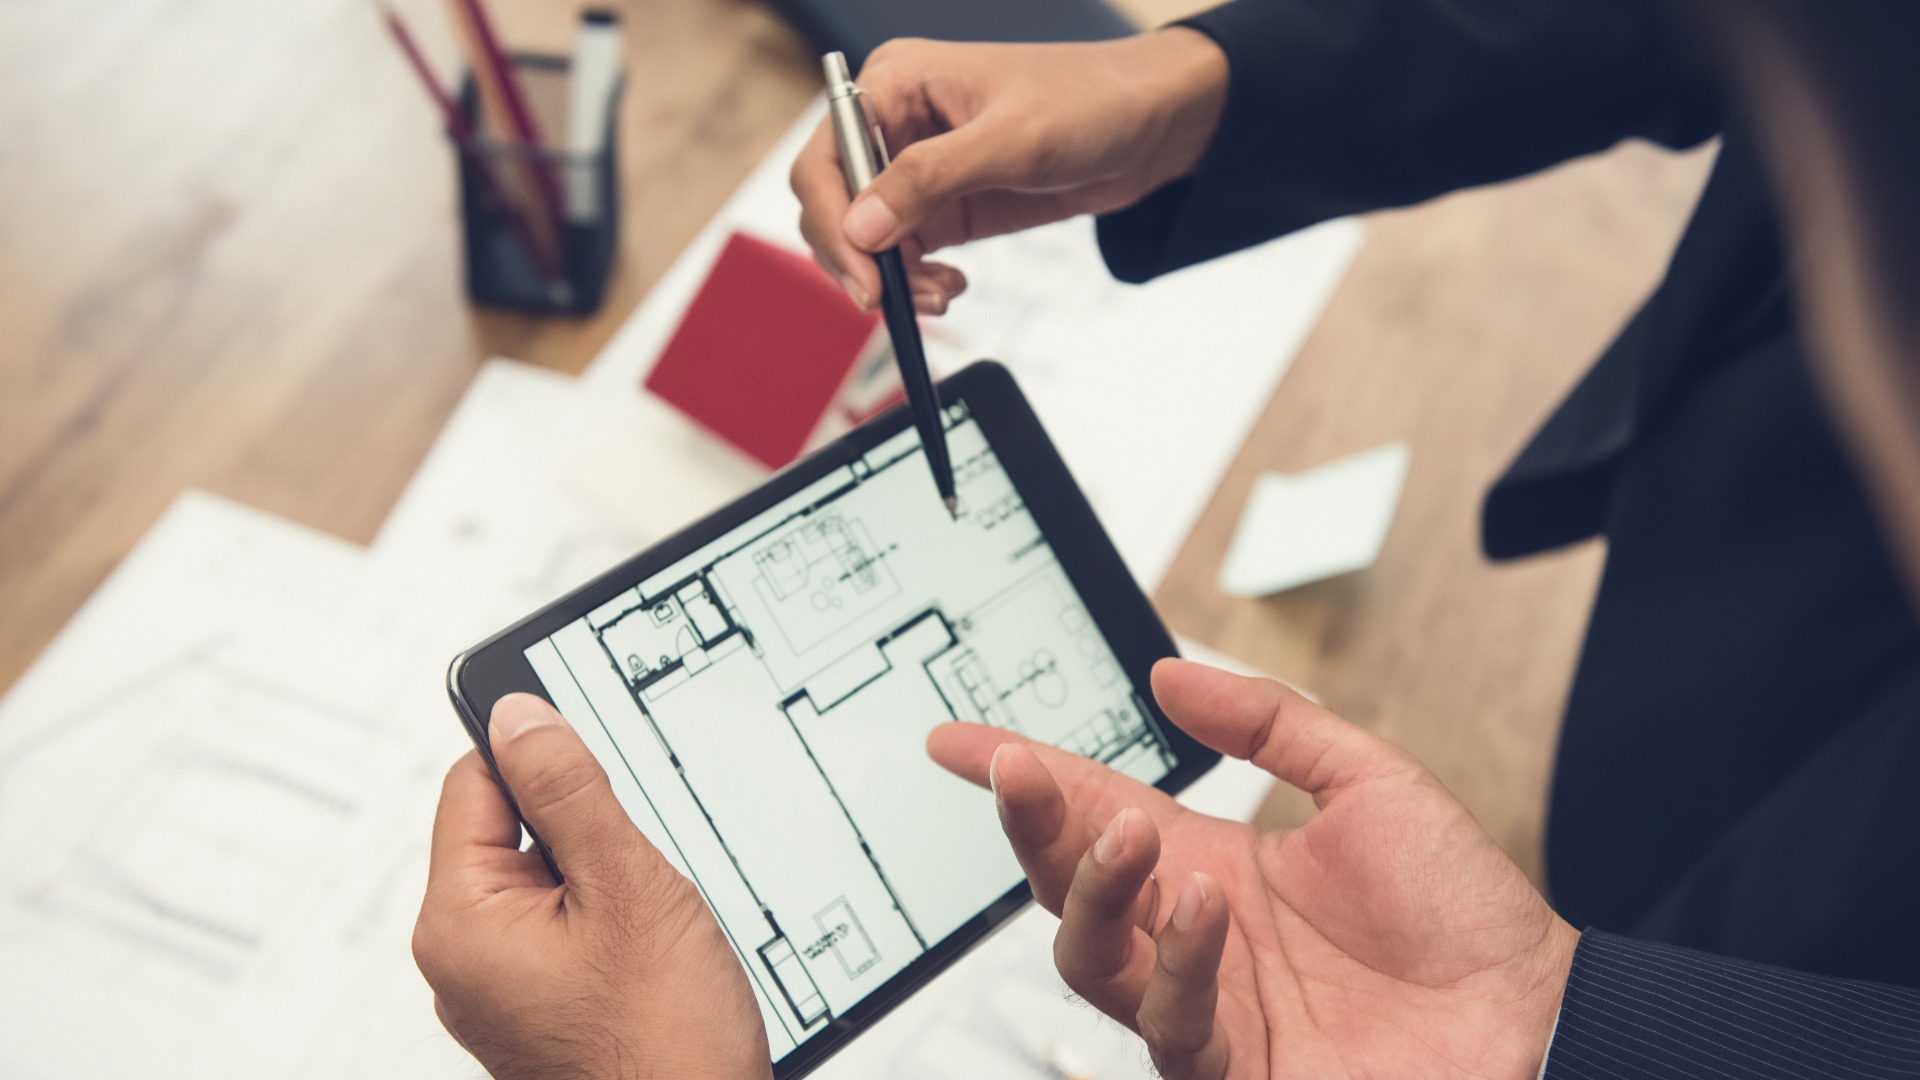 Real estate agent with client or architect team checking a housing model and its blueprints digitally using a tablet jpg